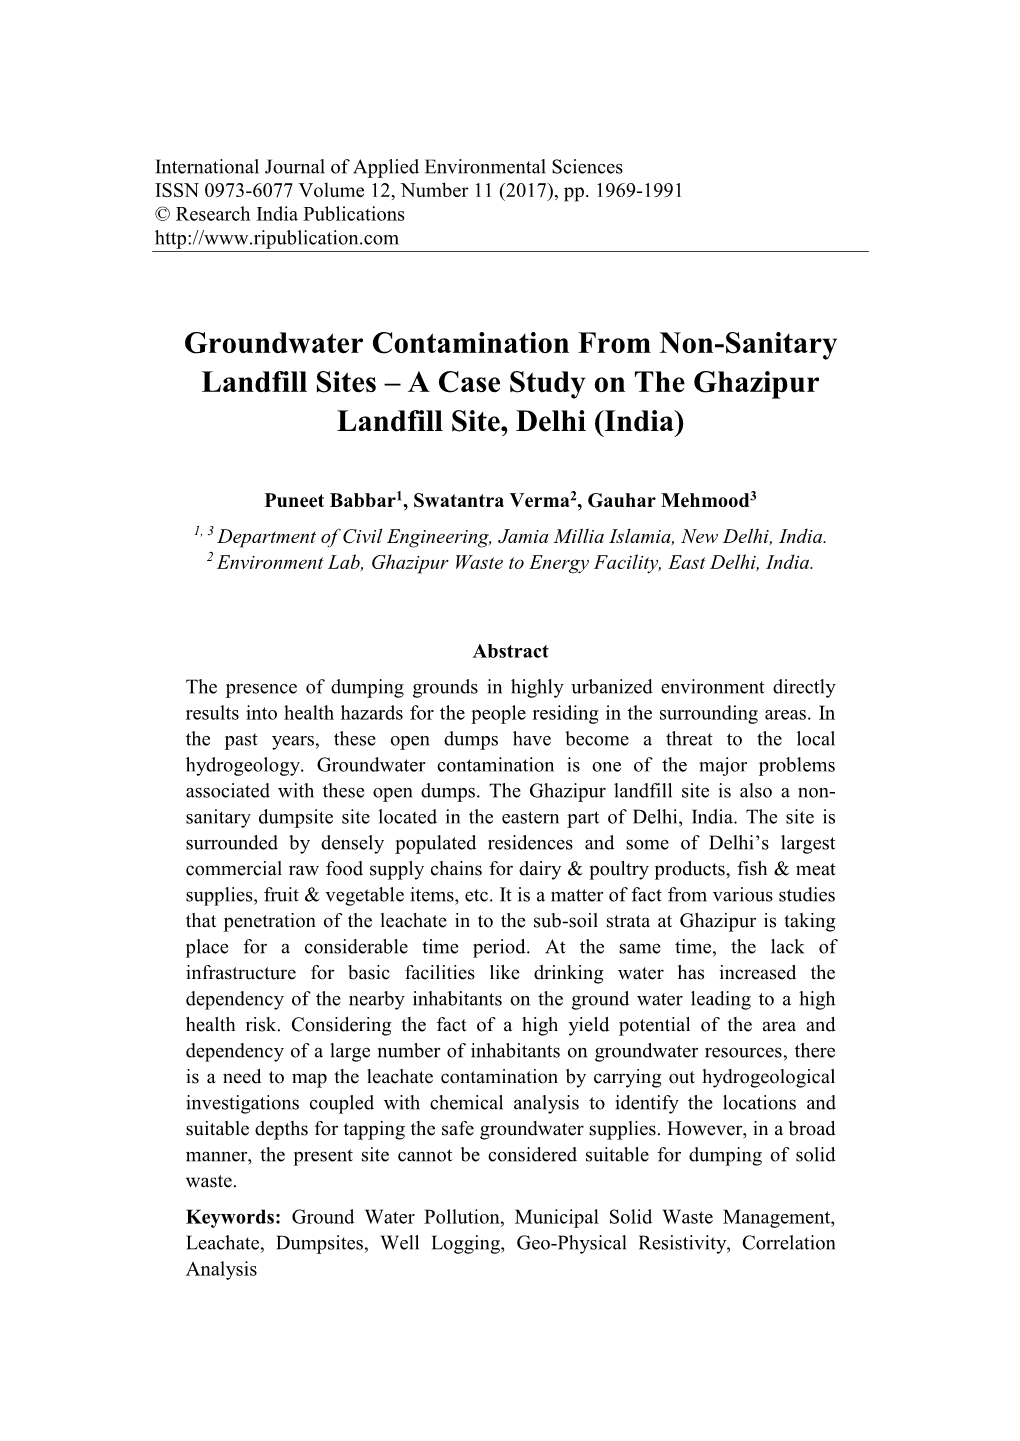 Groundwater Contamination from Non-Sanitary Landfill Sites – a Case Study on the Ghazipur Landfill Site, Delhi (India)